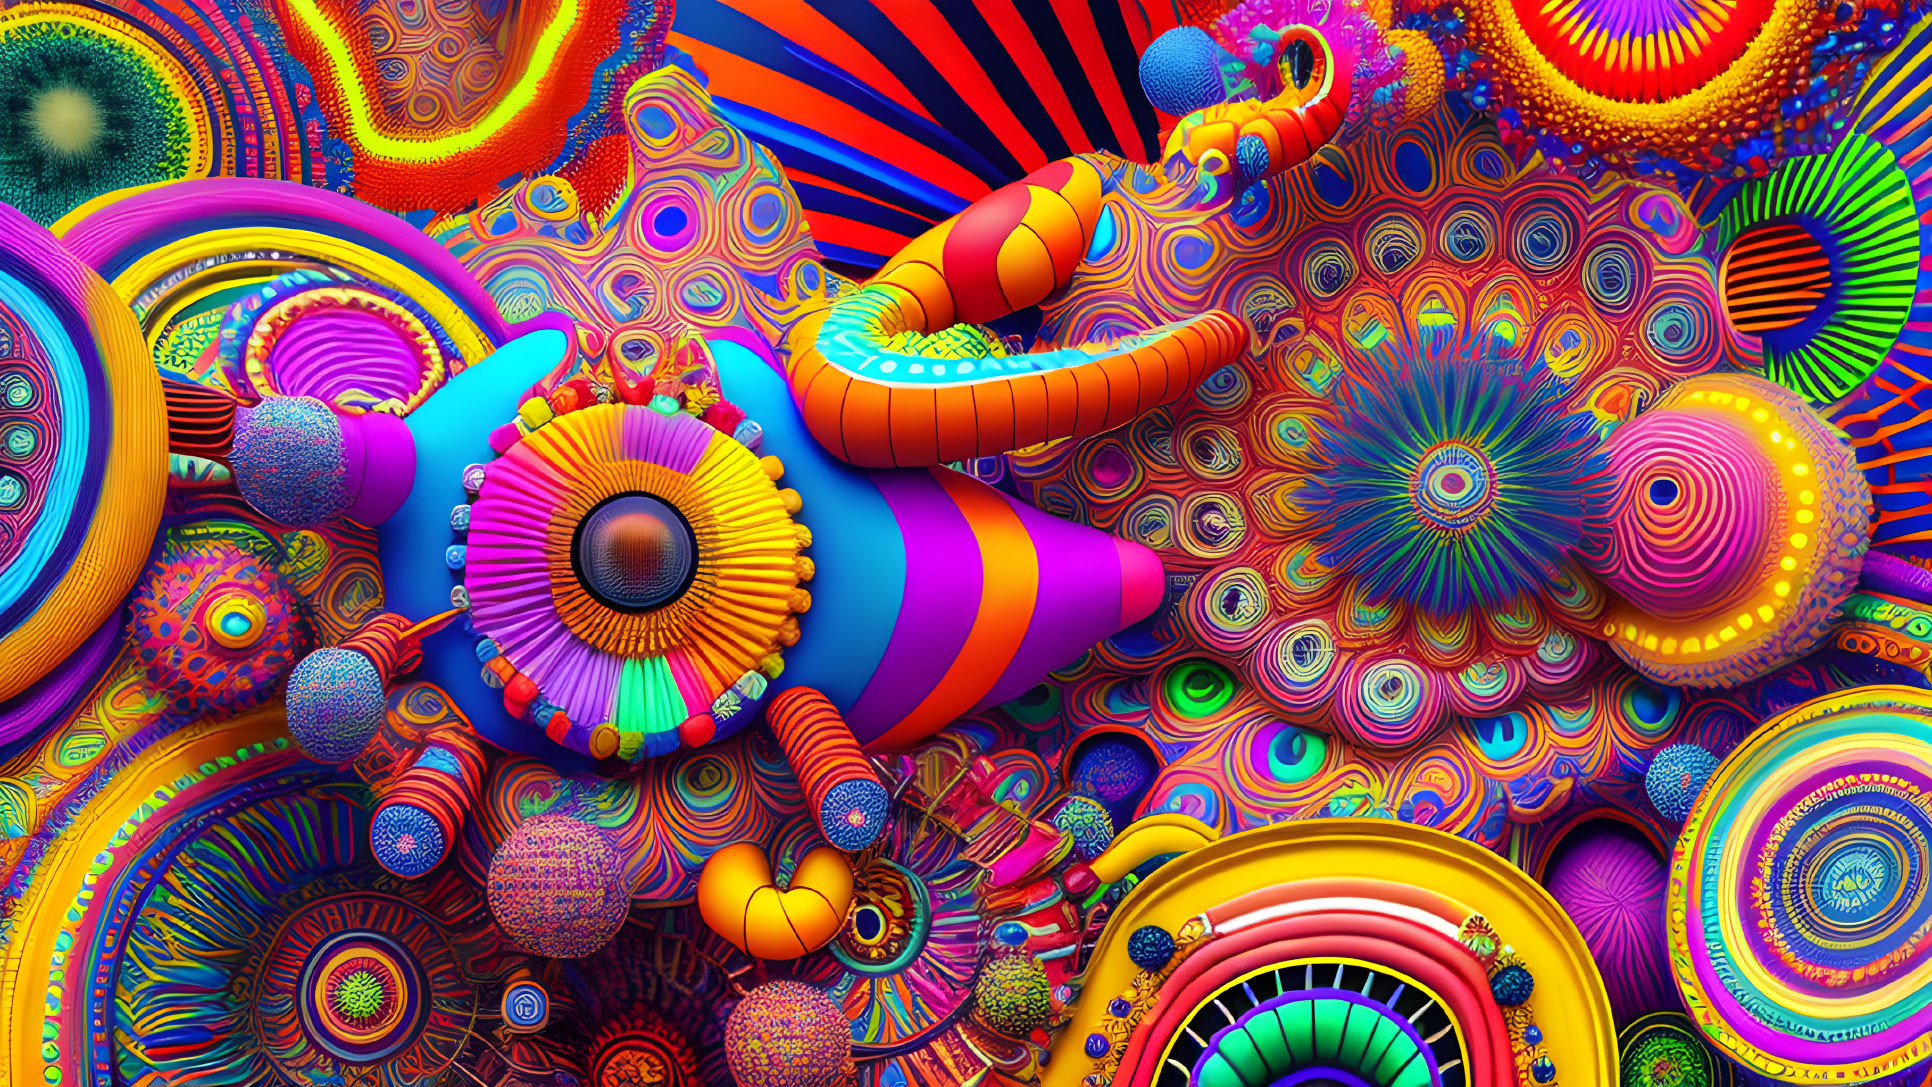 Colorful Psychedelic Digital Artwork with Abstract Patterns